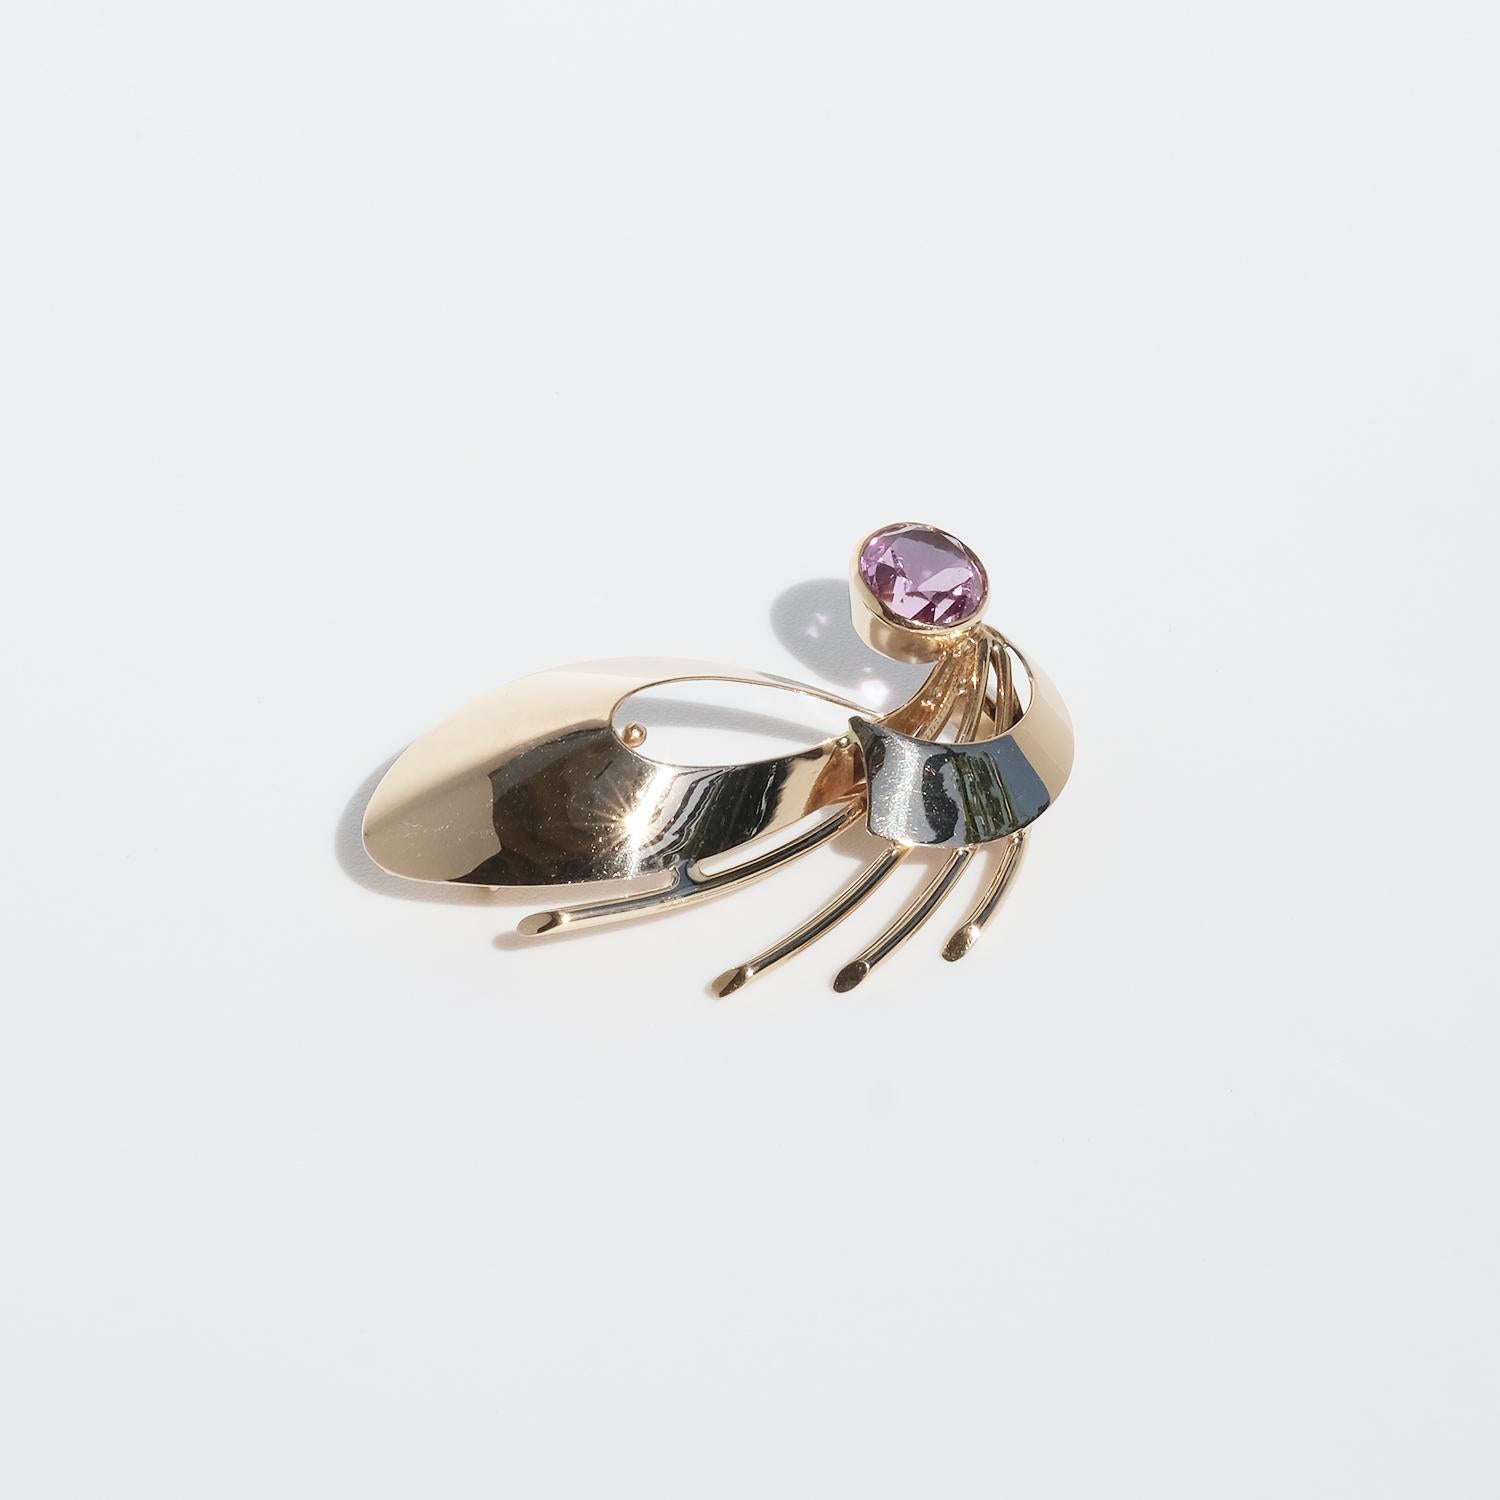 This 14 karat gold and synthetic pink sapphire has a shape resembling a beautiful dragonfly. It is fastened easily with a C clasp.

The brooch has a charming and happy look making it a perfect fit on the shirt collar or the cuff of a shirt. Or why